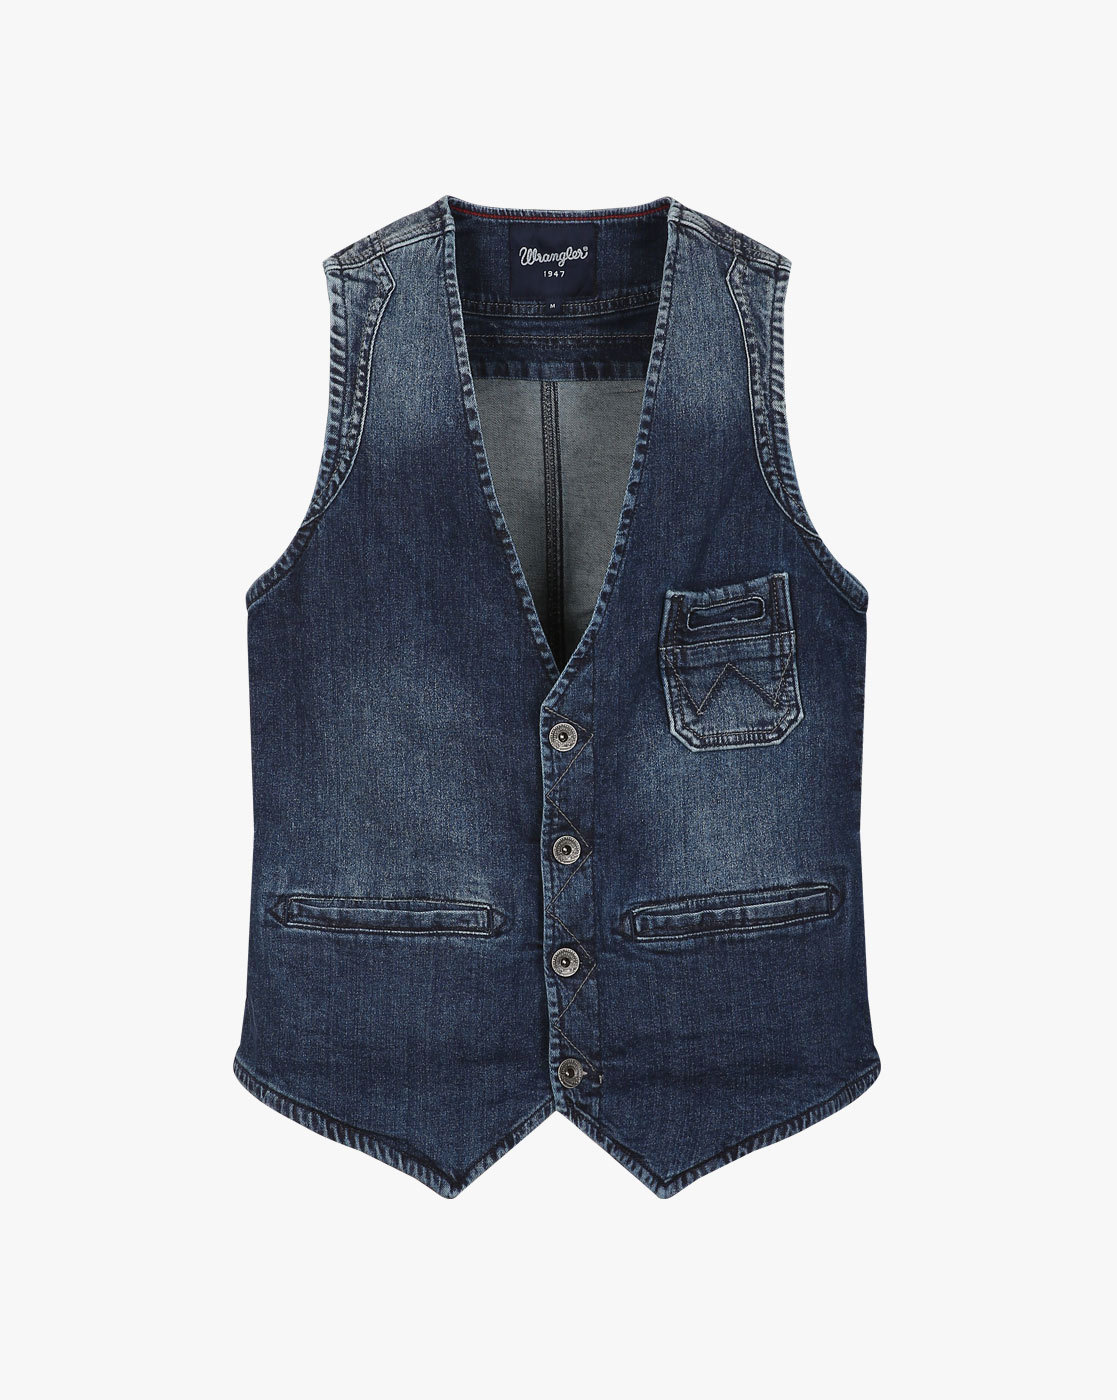 Women's Denim Waistcoat Casual Vintage Slim Fit Frayed Sleeveless Jean  Gilet with Pockets Lightweight V Neck Button Down Pleated Jean Jacket  Ripped Tops Denim Vest Cowboy Outfit Festival Jacket : Amazon.co.uk: Fashion